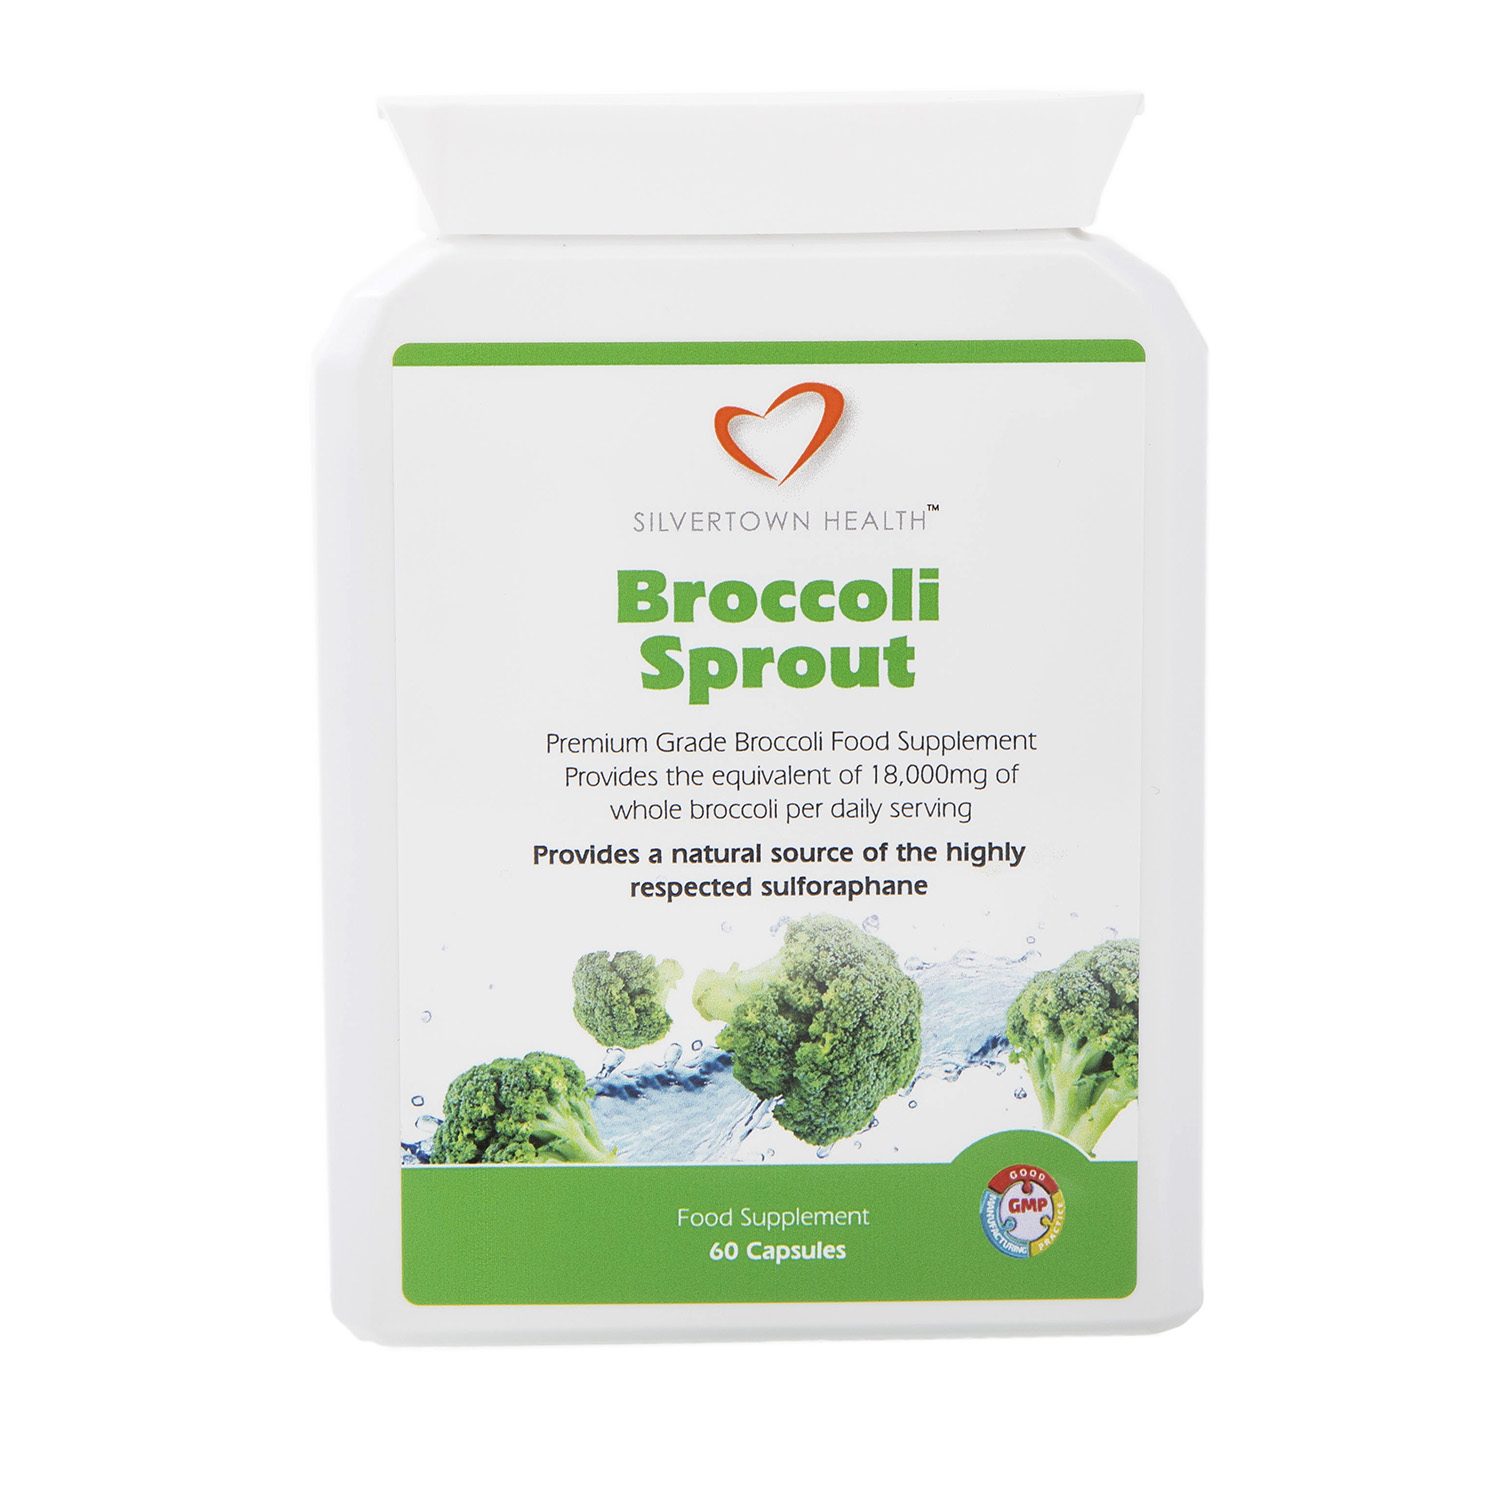 Broccoli Sprout - 60 Capsules